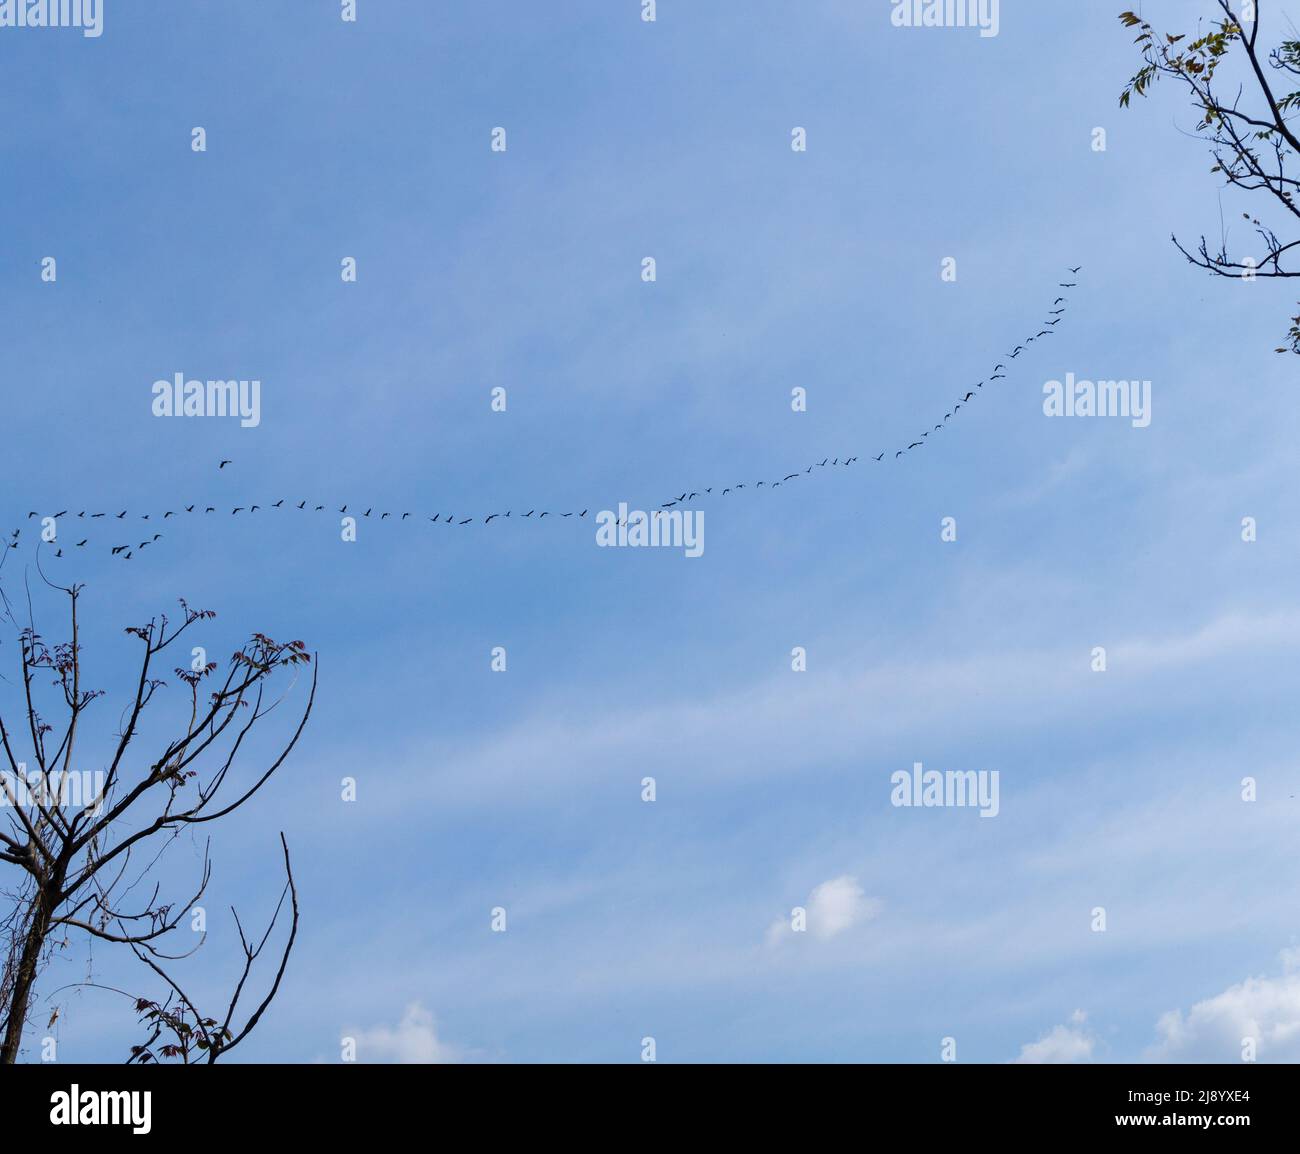 A line of migrating birds flying in a row in the blue skies of uttarakahnd India. Stock Photo